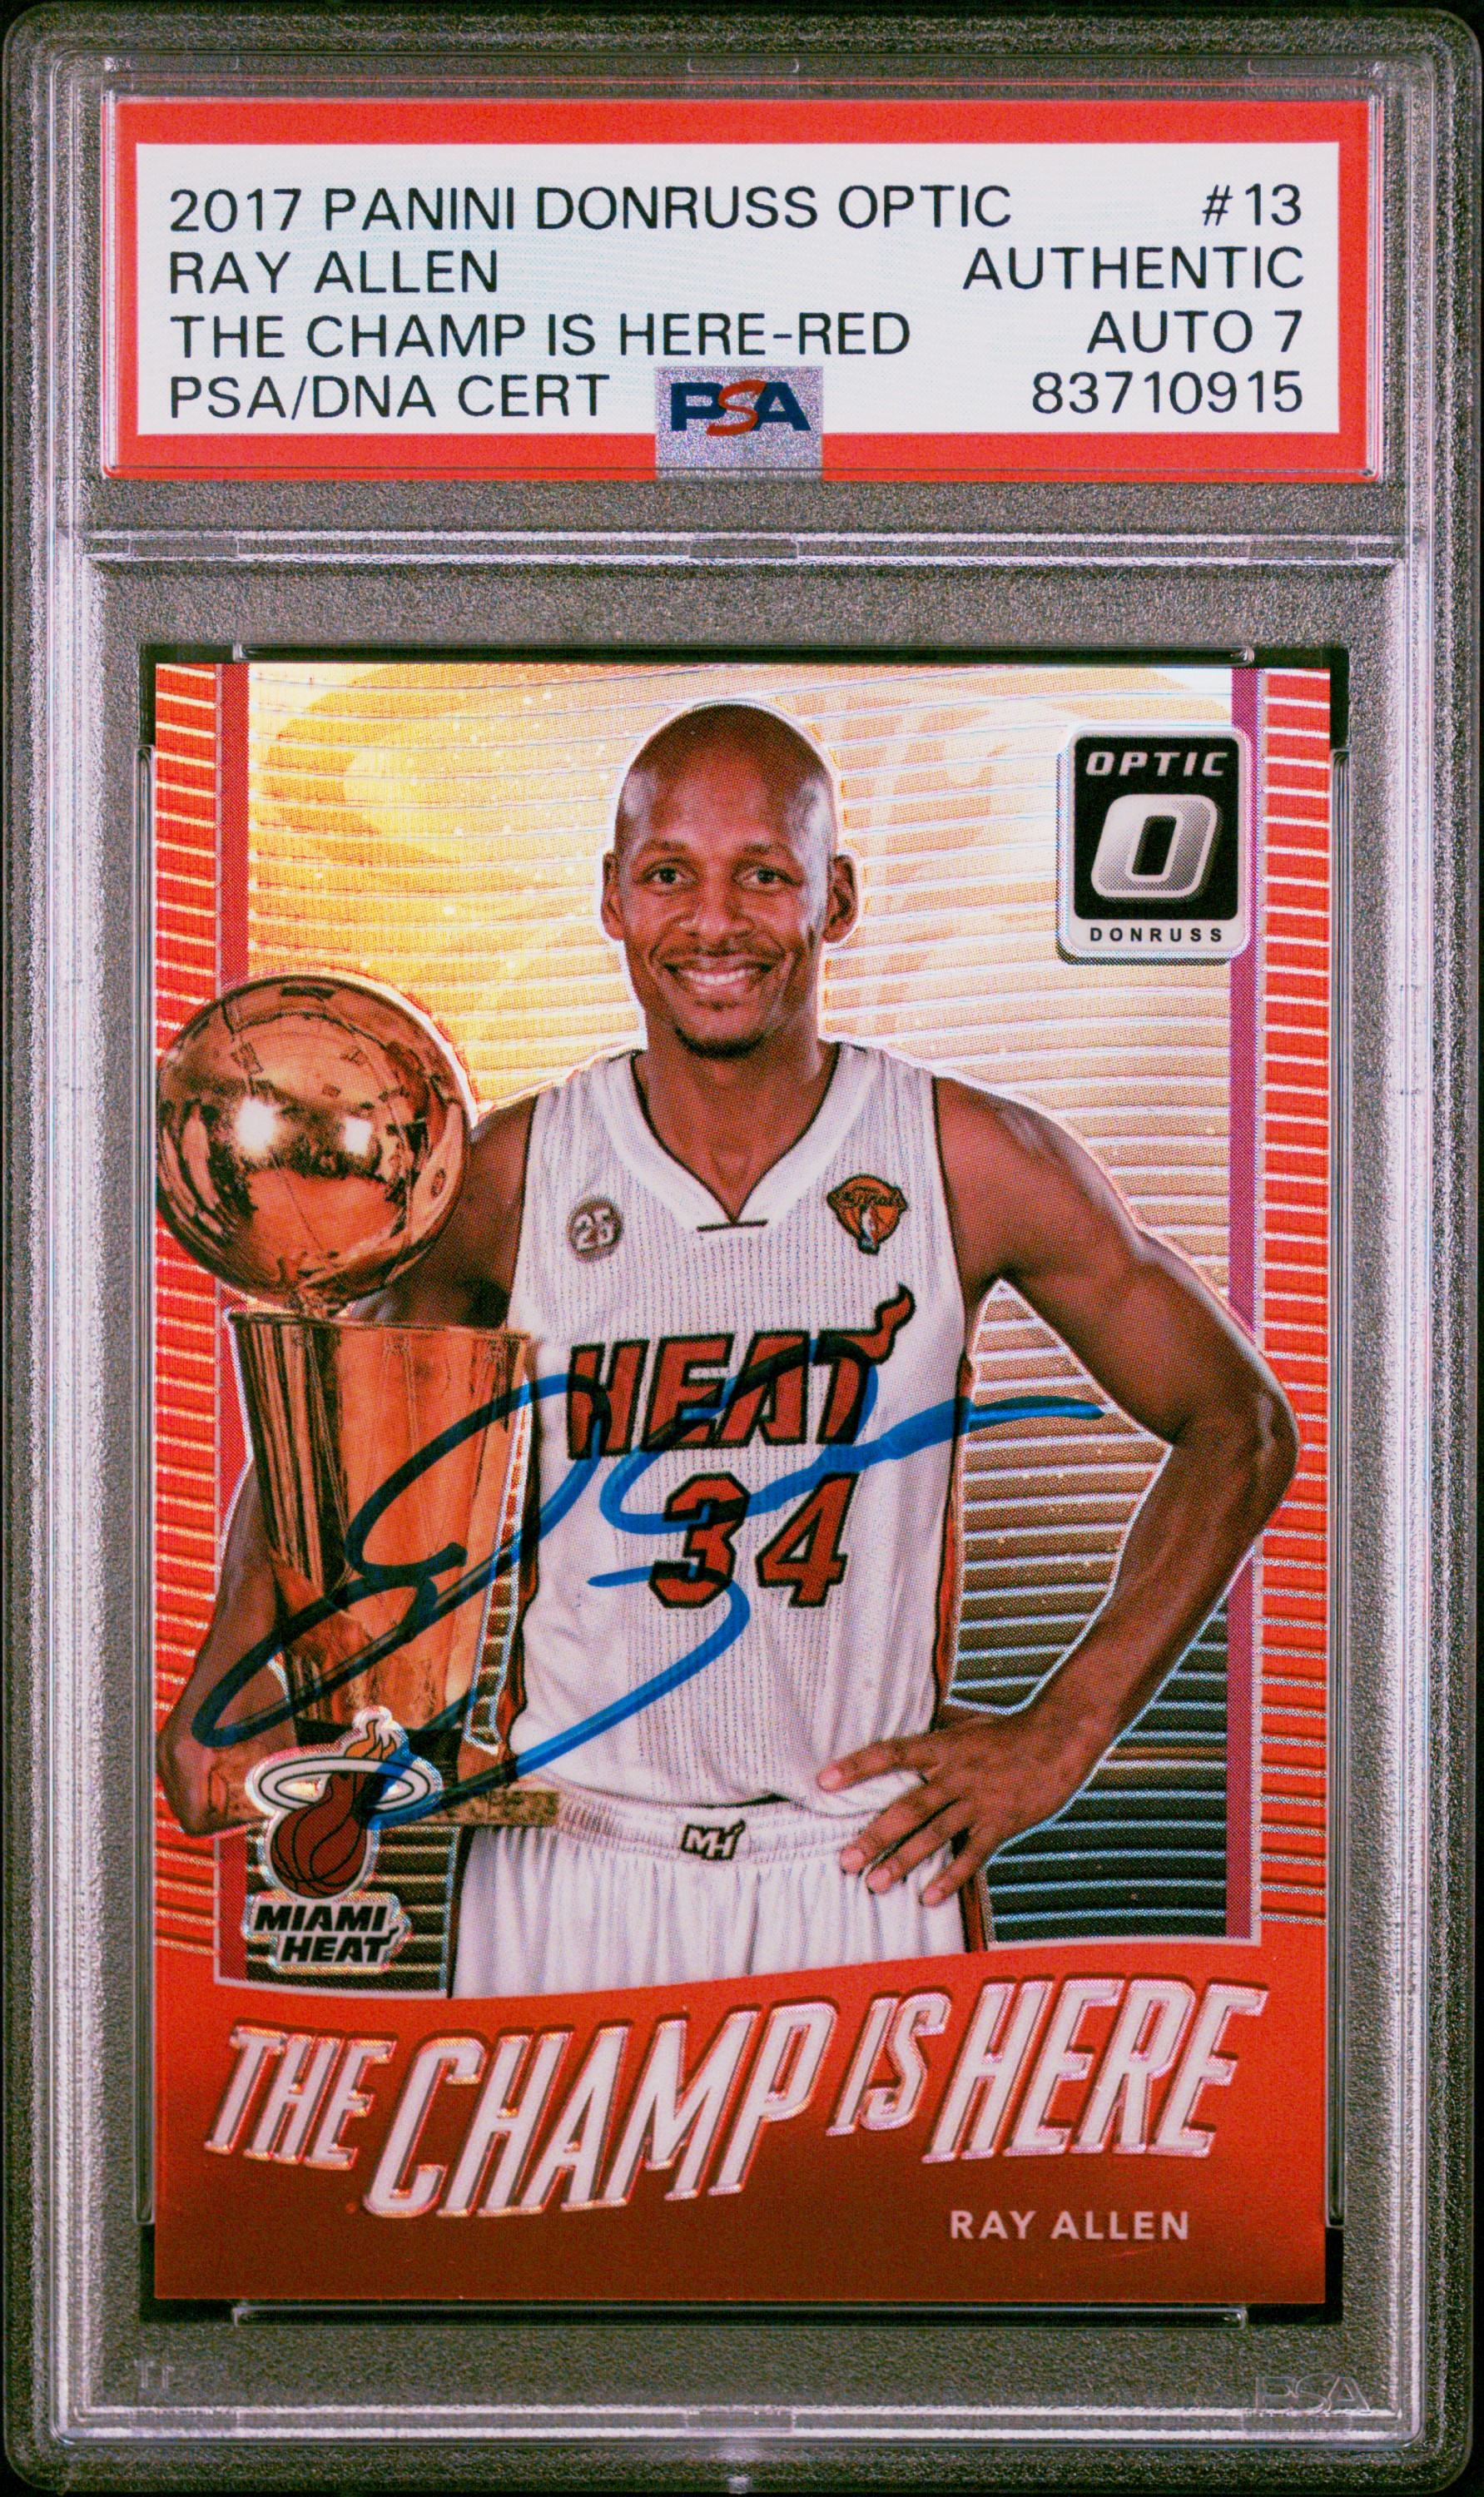 Ray Allen 2017 Panini Donruss Optic Red Signed Card #13 Auto Graded PSA 7 91/99